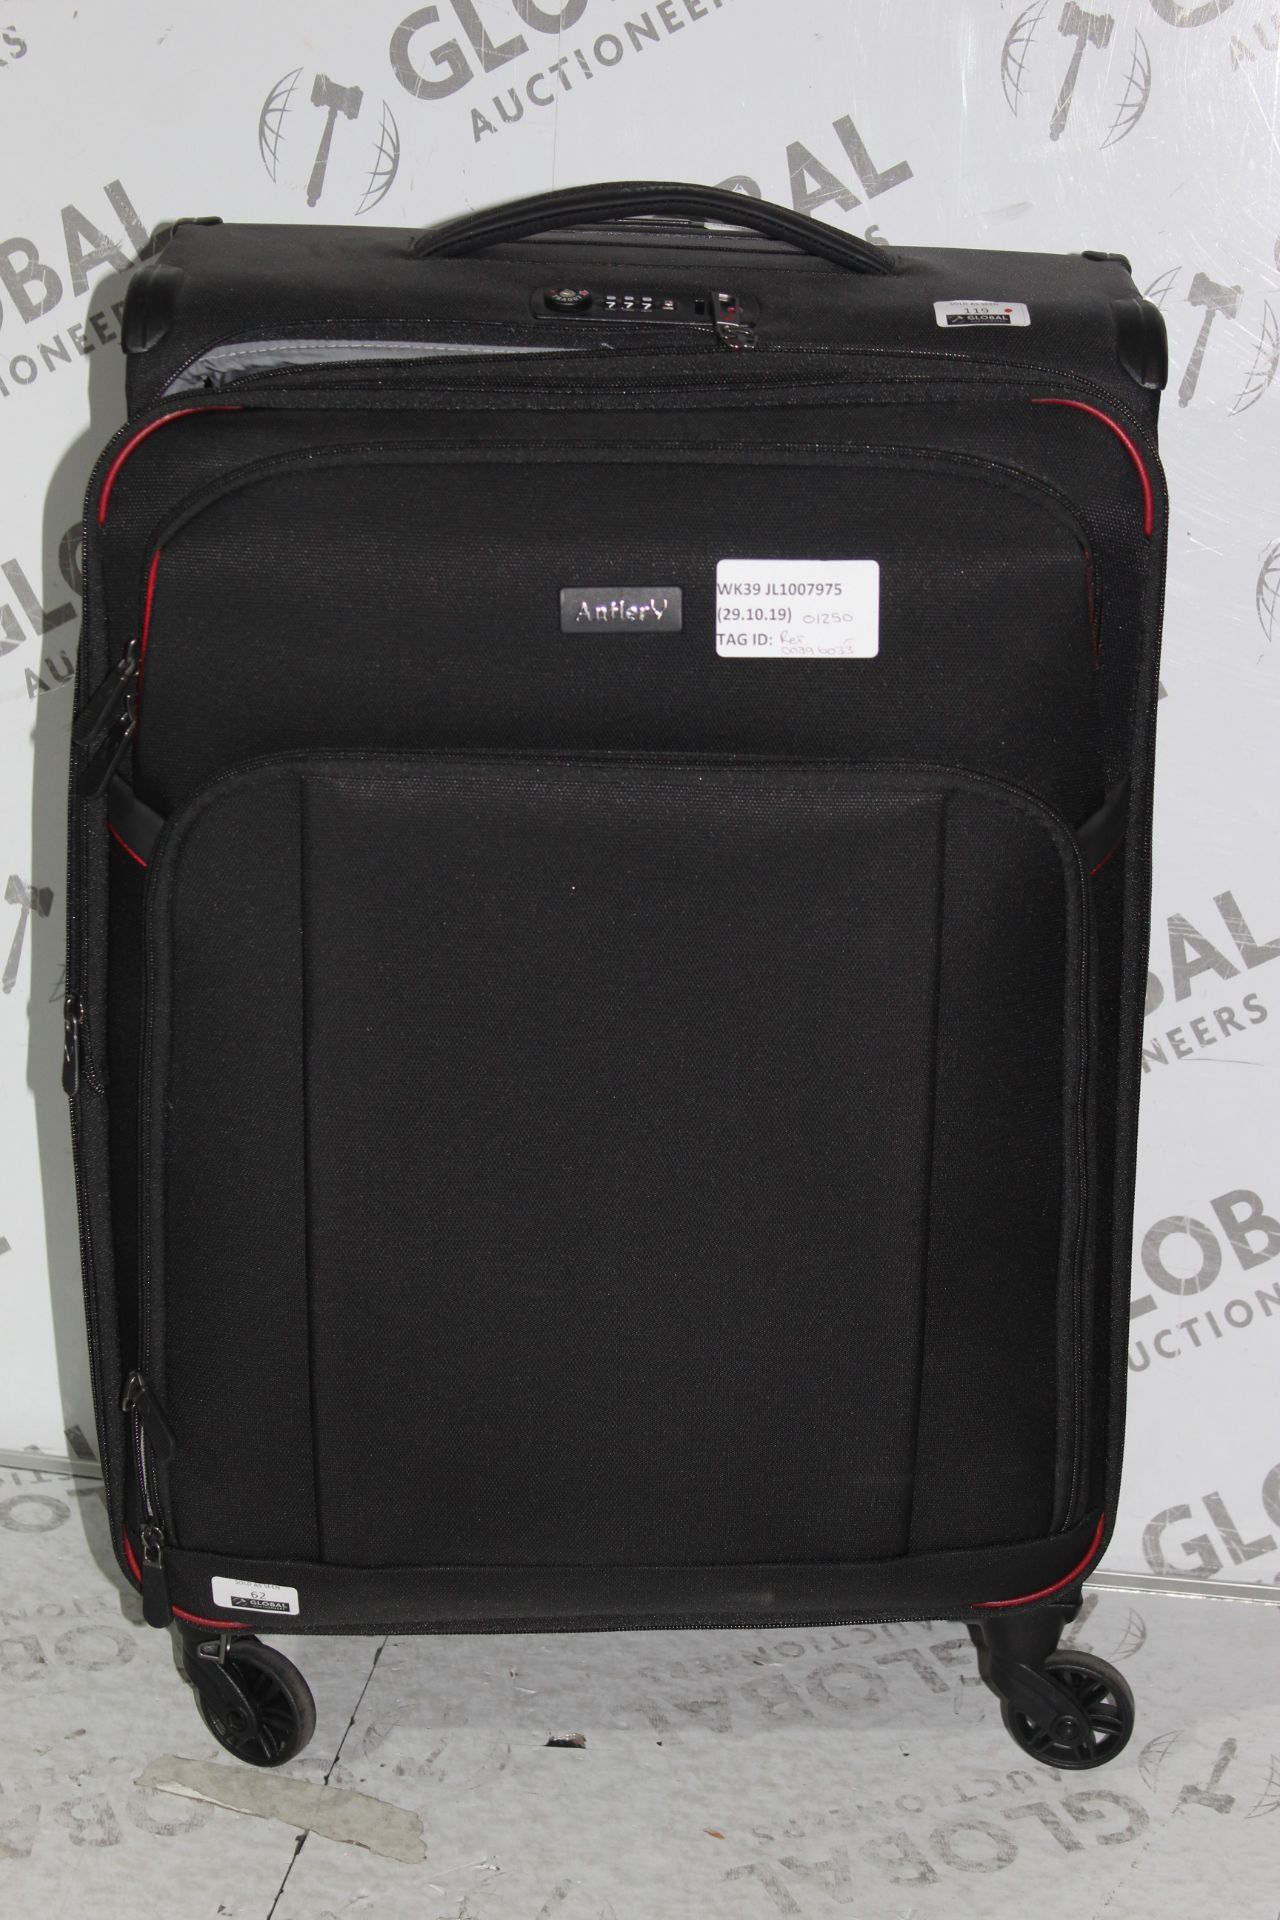 Antler Soft Shell Black Medium Spinner Suitcase RRP £125 (RET00896033) (Public Viewing and